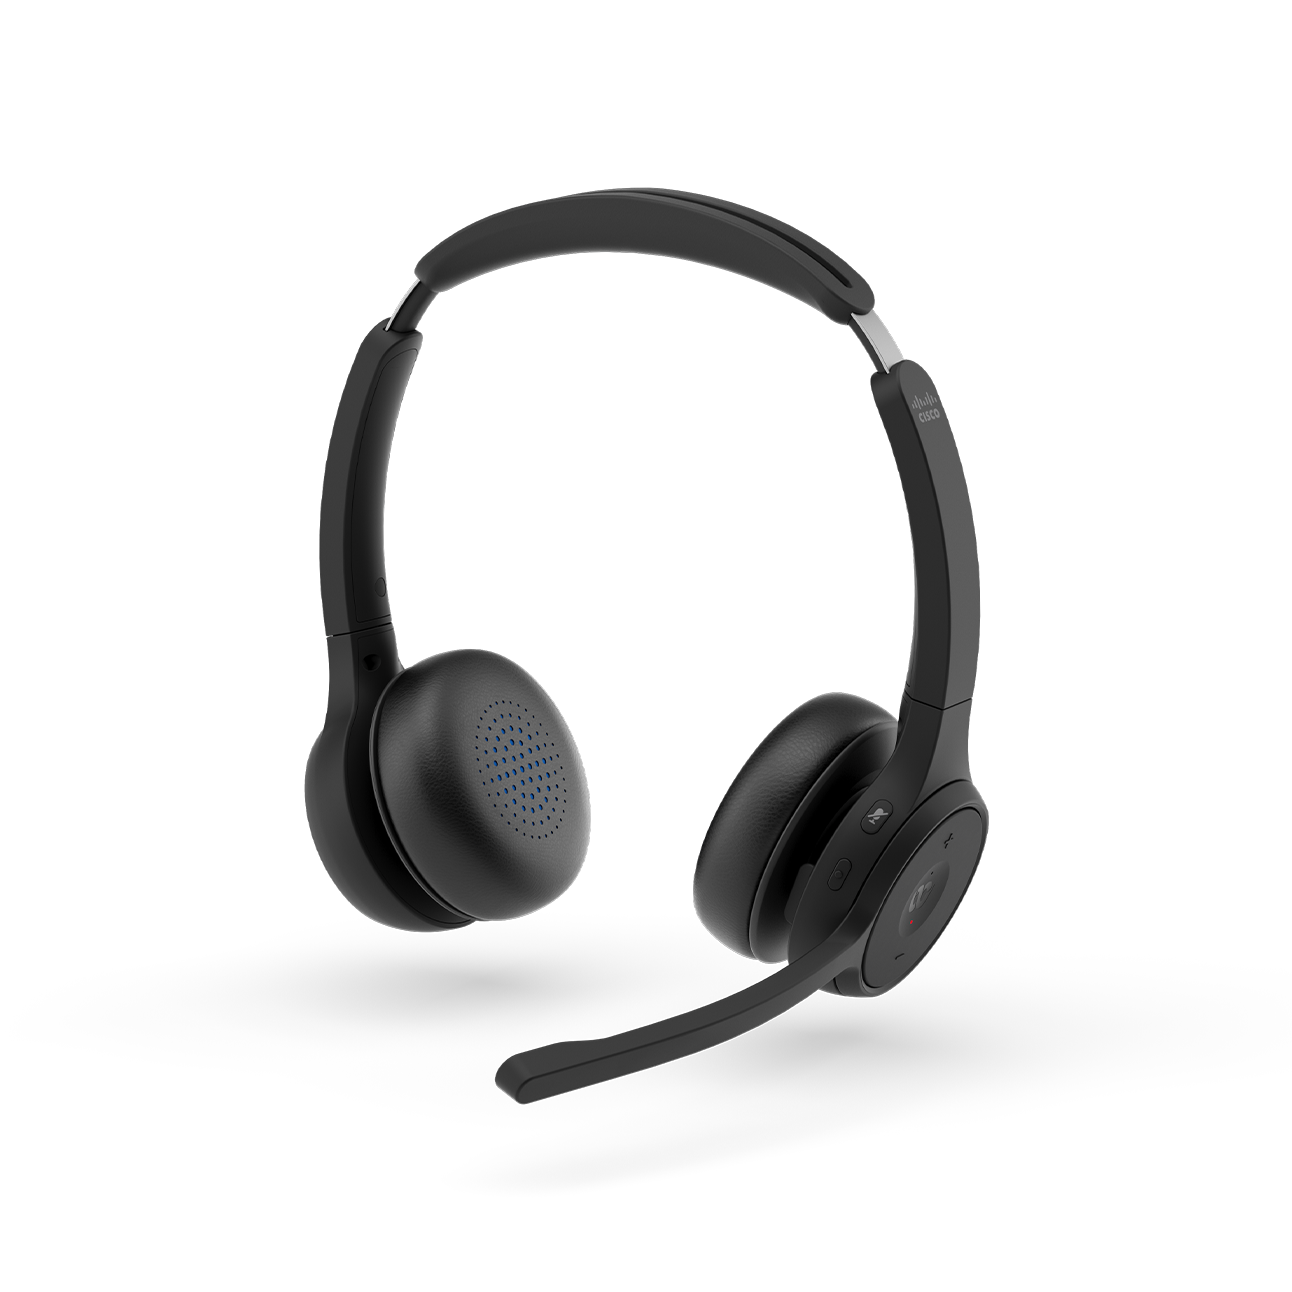 The Cisco Headset 720 Series in the First Light color (white). Screen shows time of 9:54 and apps like Meetings and Call.